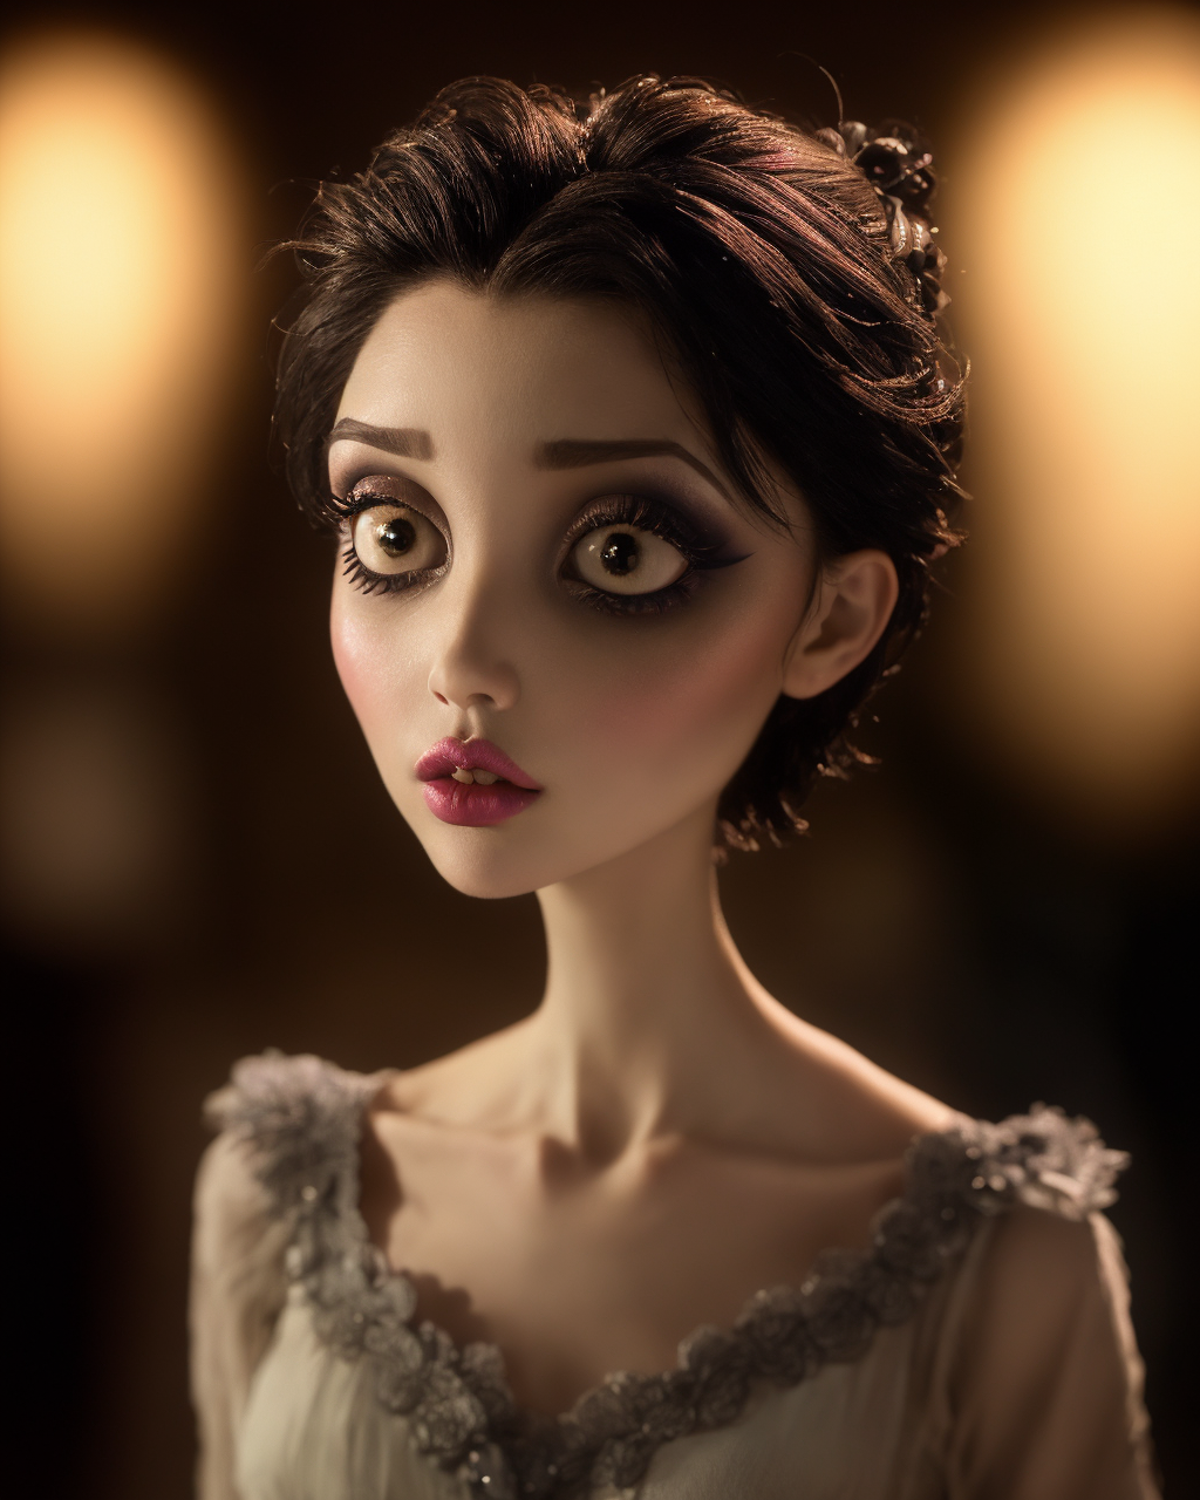 A Skeleton Woman in a Dress with Large Eyes and Dark Hair.